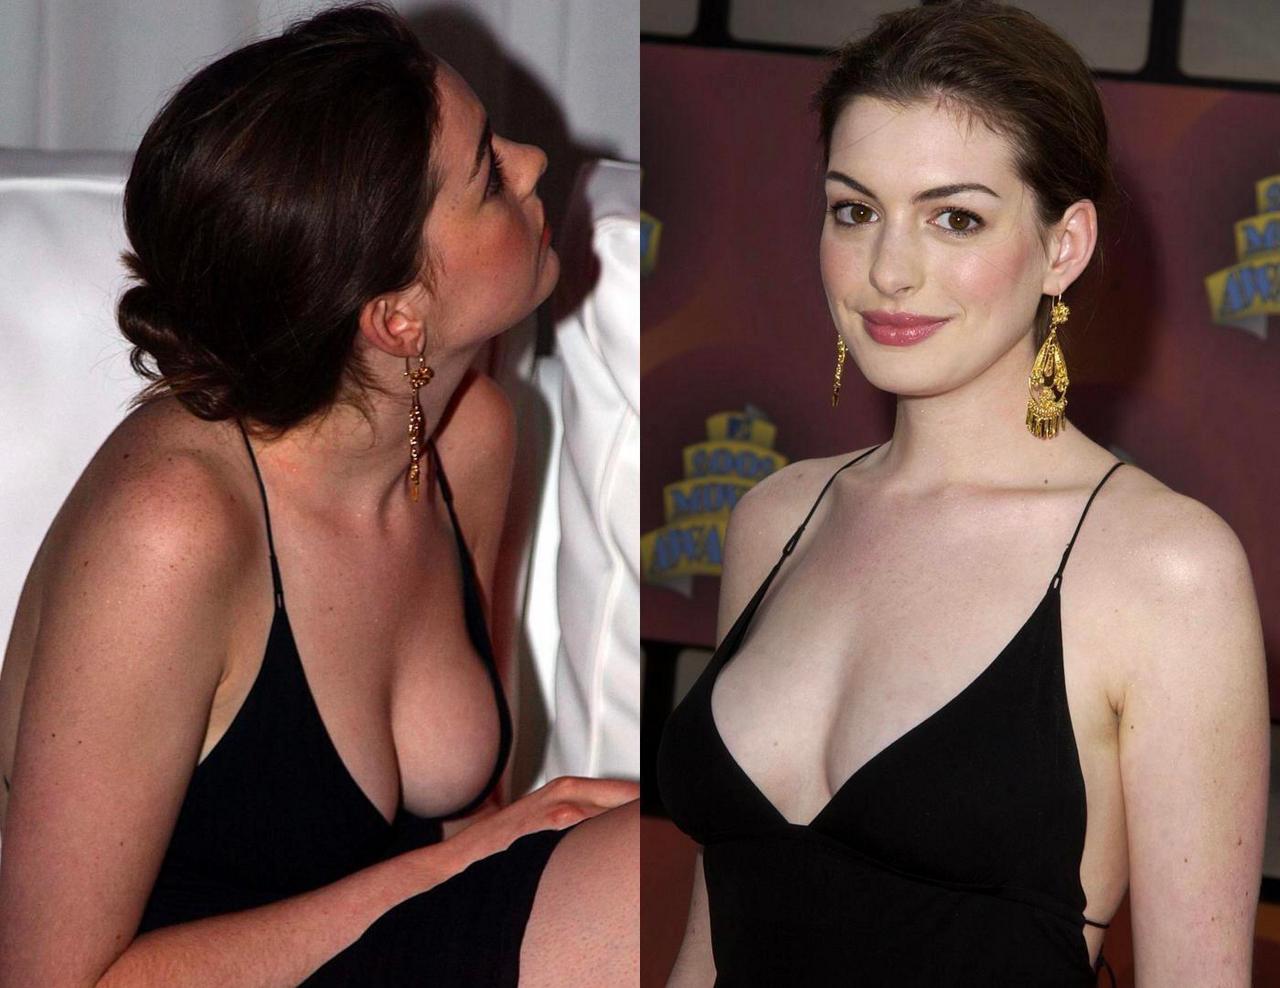 The Beautiful Anne Hathaway Always Gets Me Going NSFW